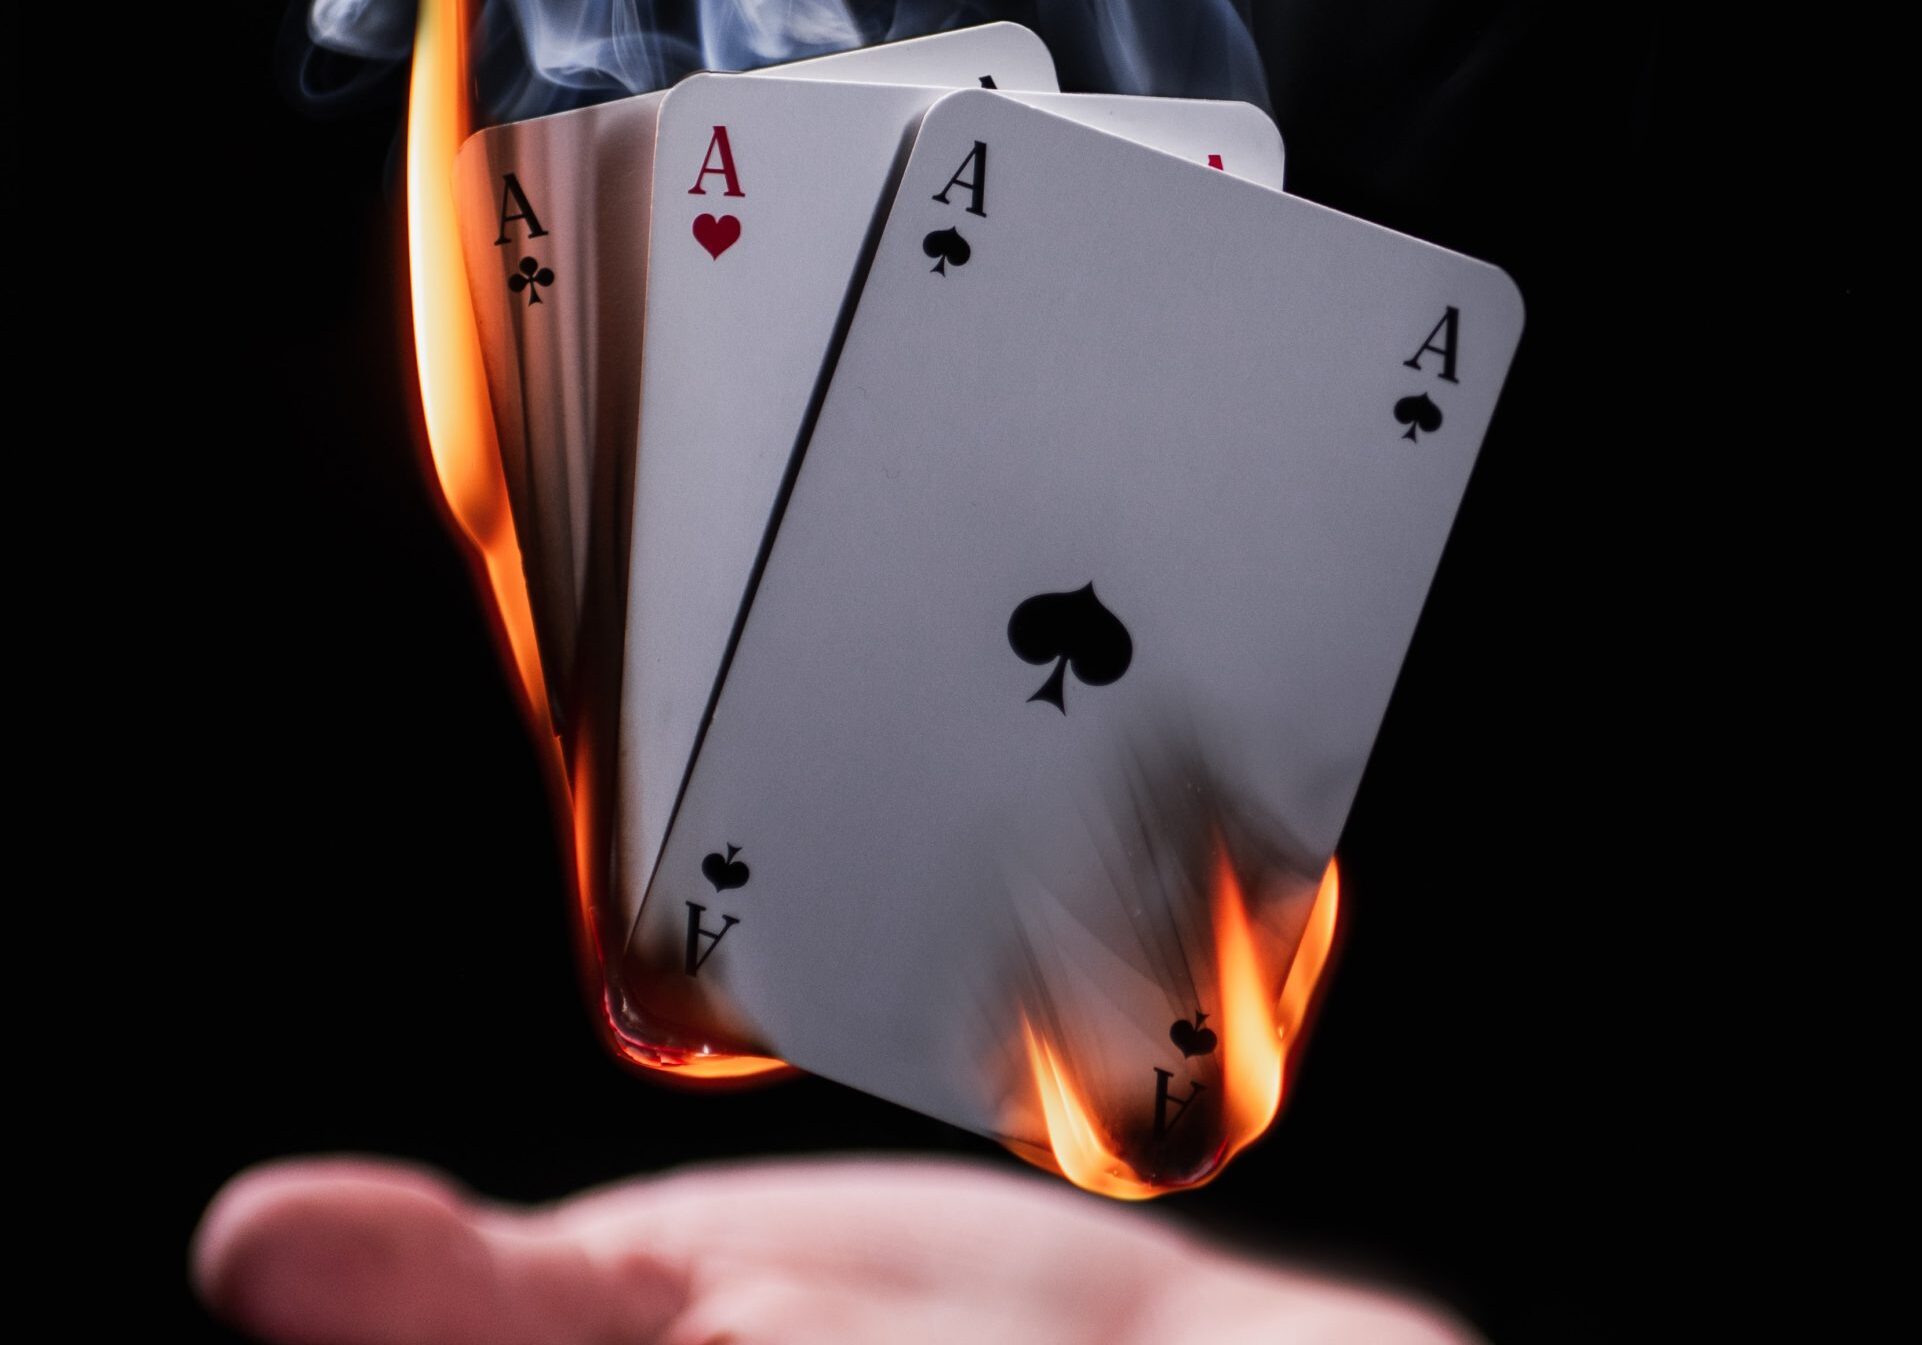 Deck of cards in flames